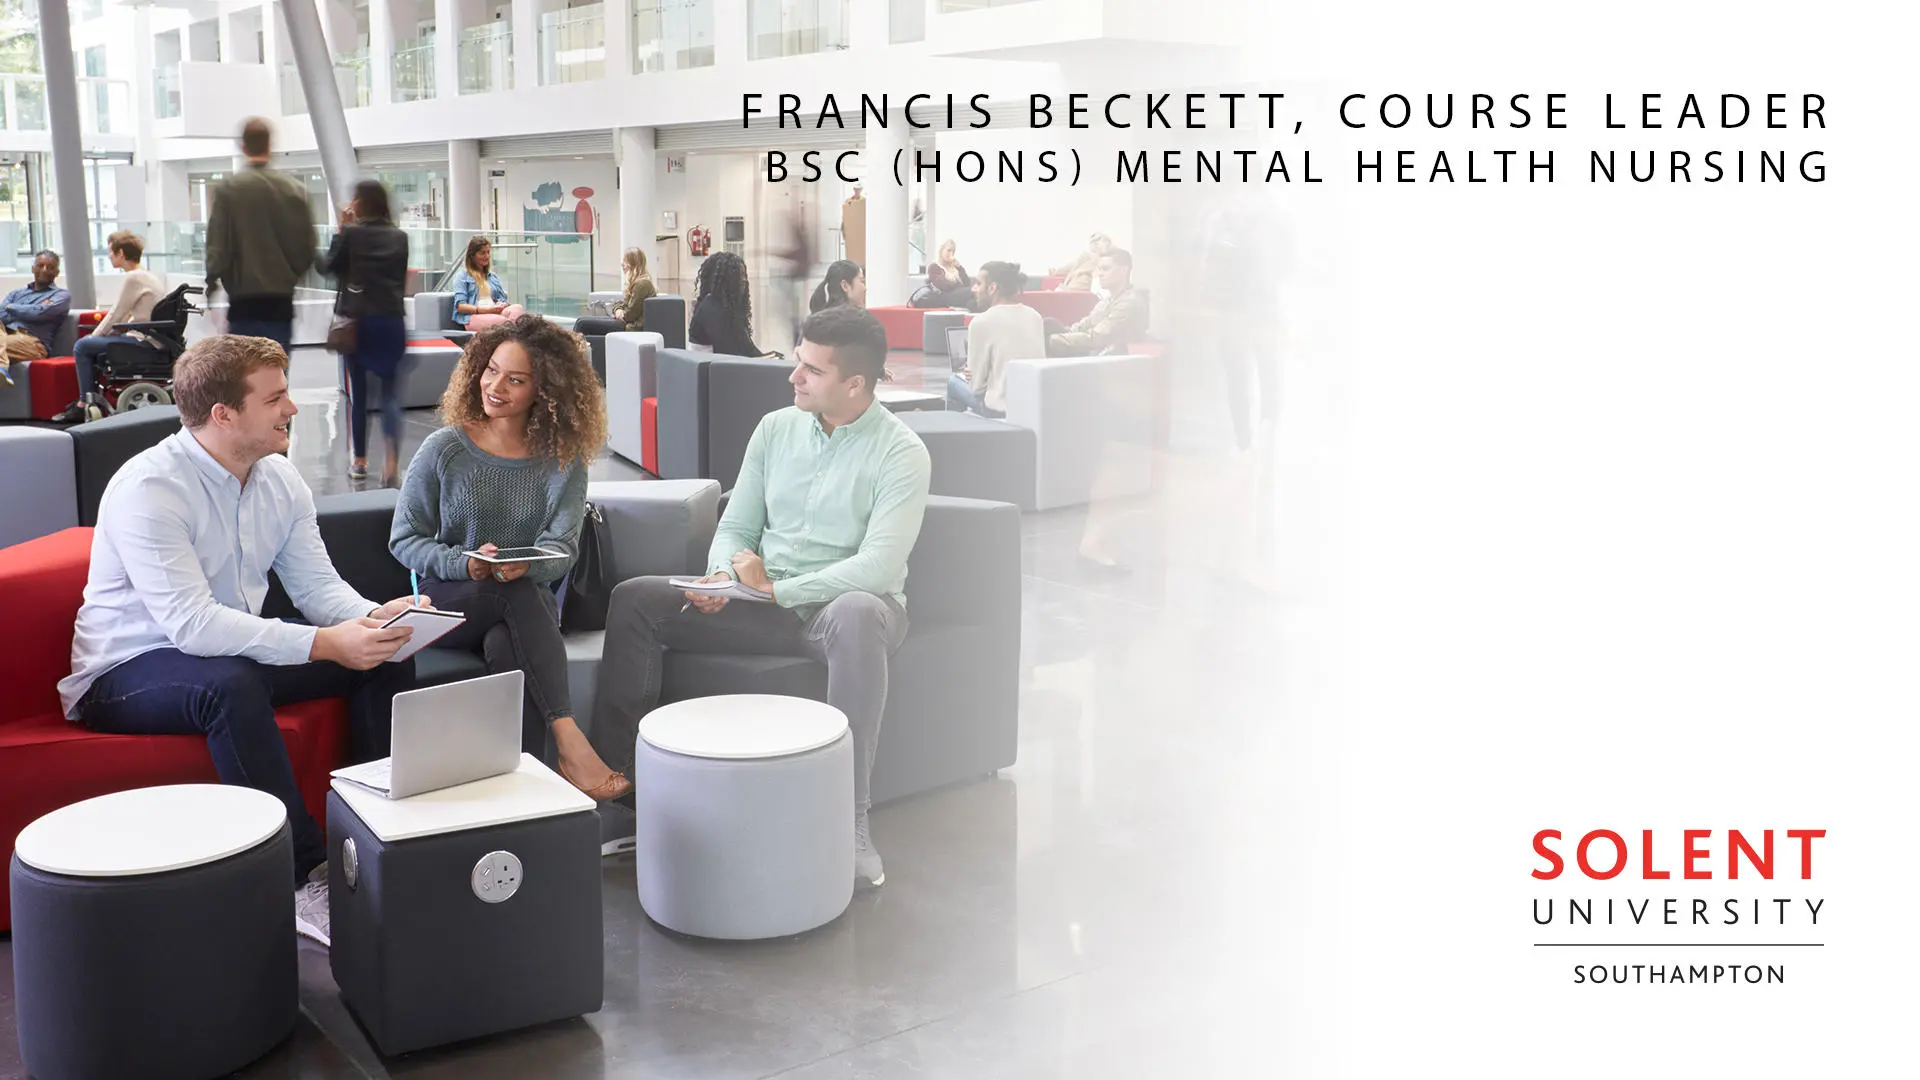 A video thumbnail of Course Leader Francis Beckett talks about Mental Health Nursing course at Solent